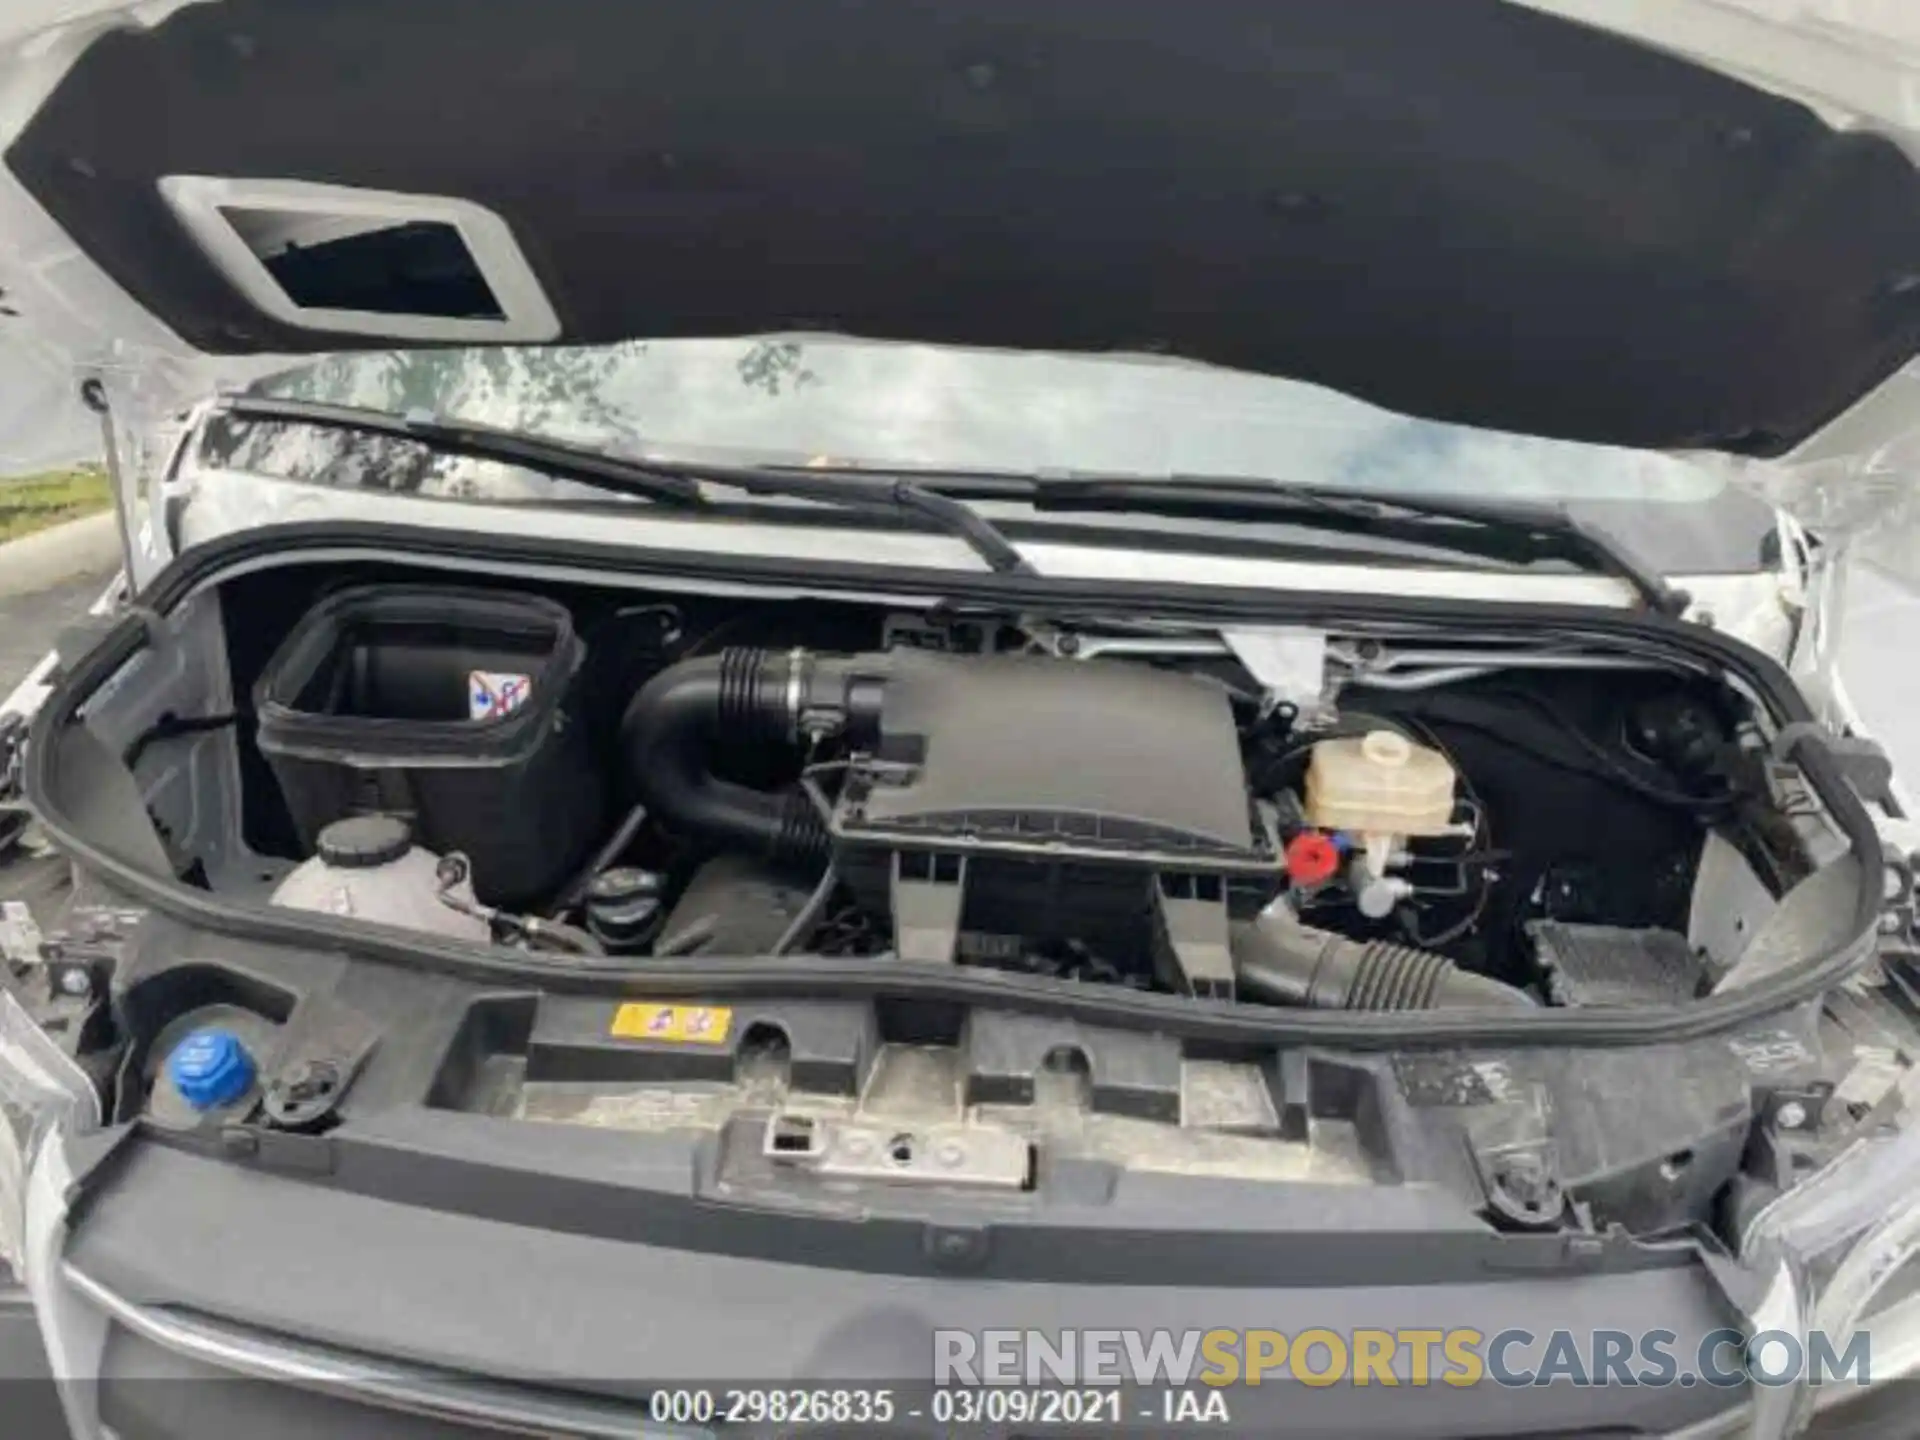 10 Photograph of a damaged car WDAPF4CD6KN015095 MERCEDES-BENZ SPRINTER CAB CHASSIS 2019